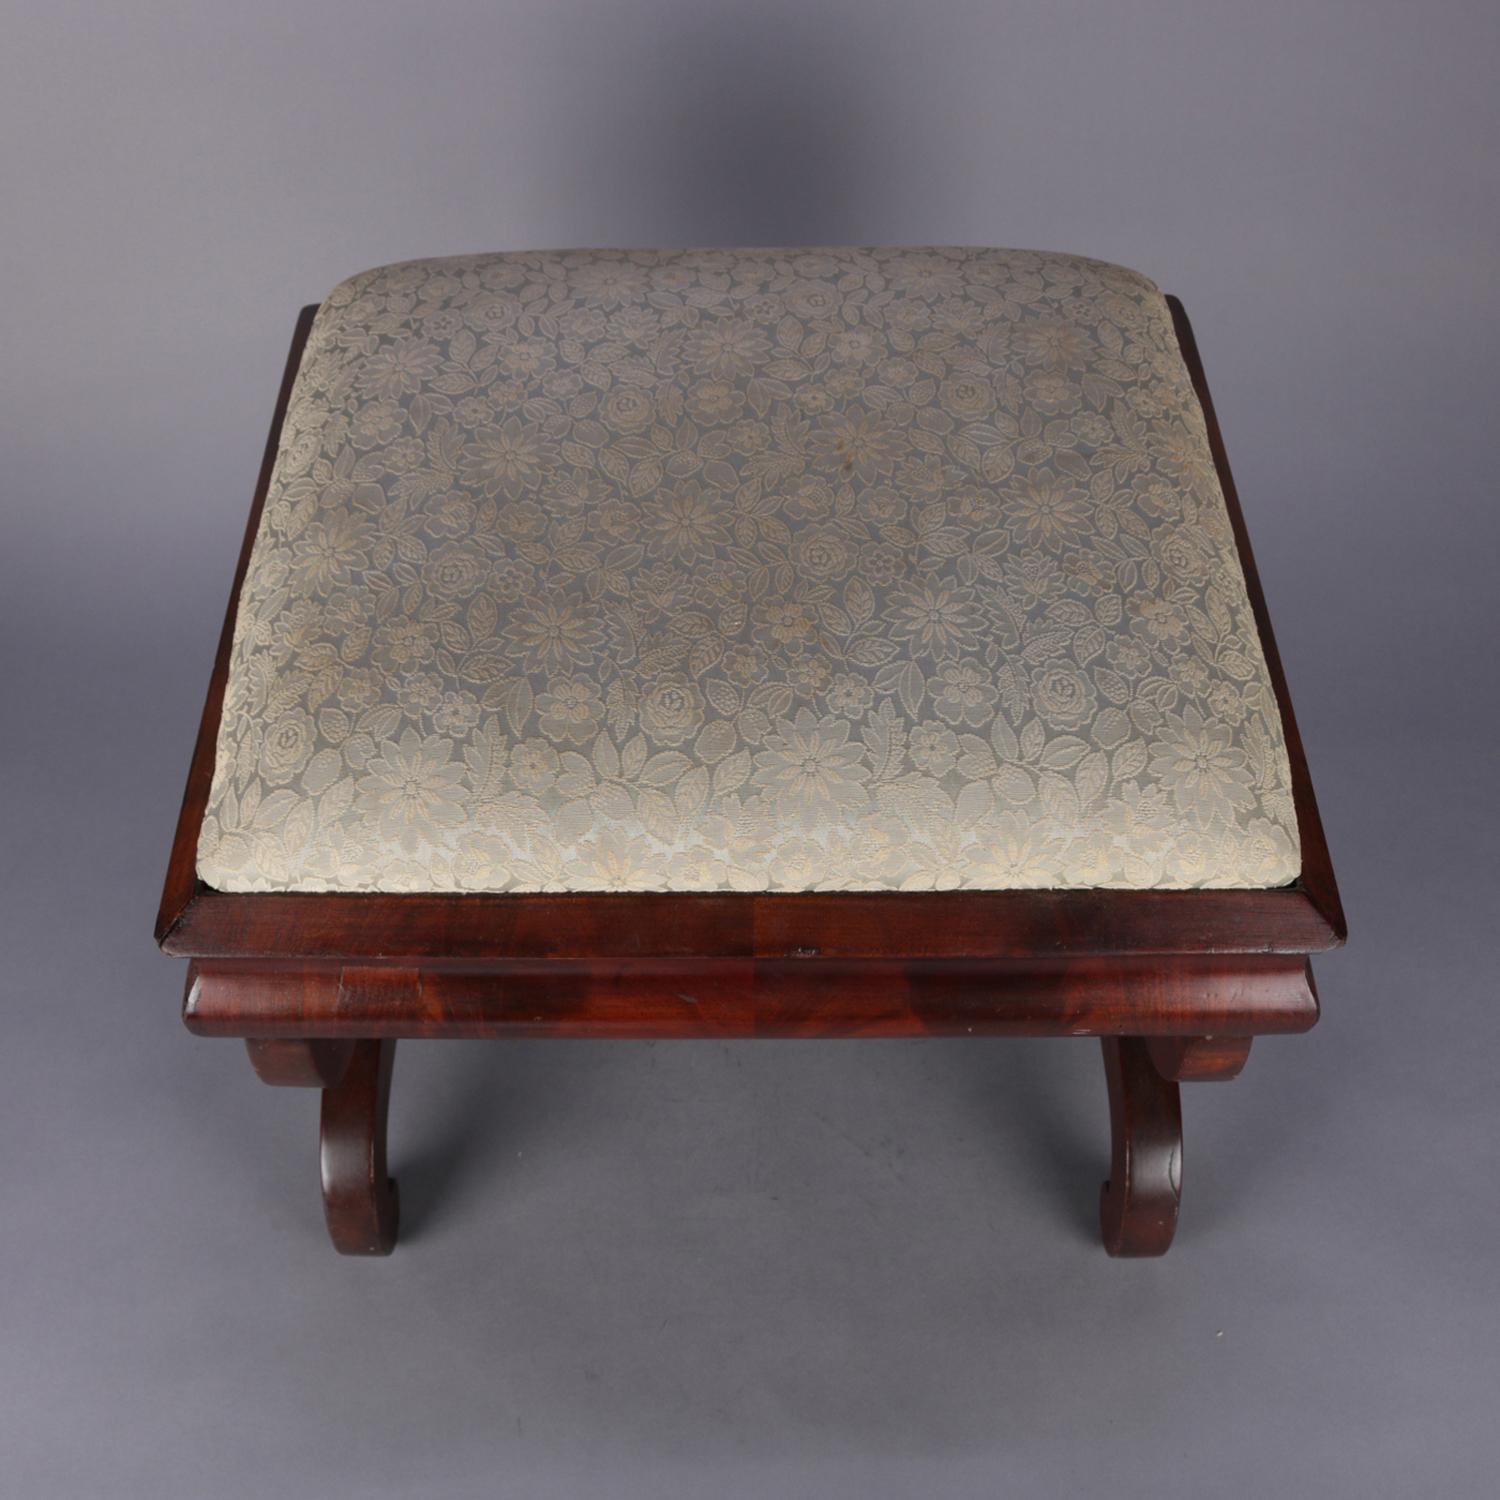 Upholstery Antique American Empire Flame Mahogany Ogee Upholstered Footstool, circa 1840